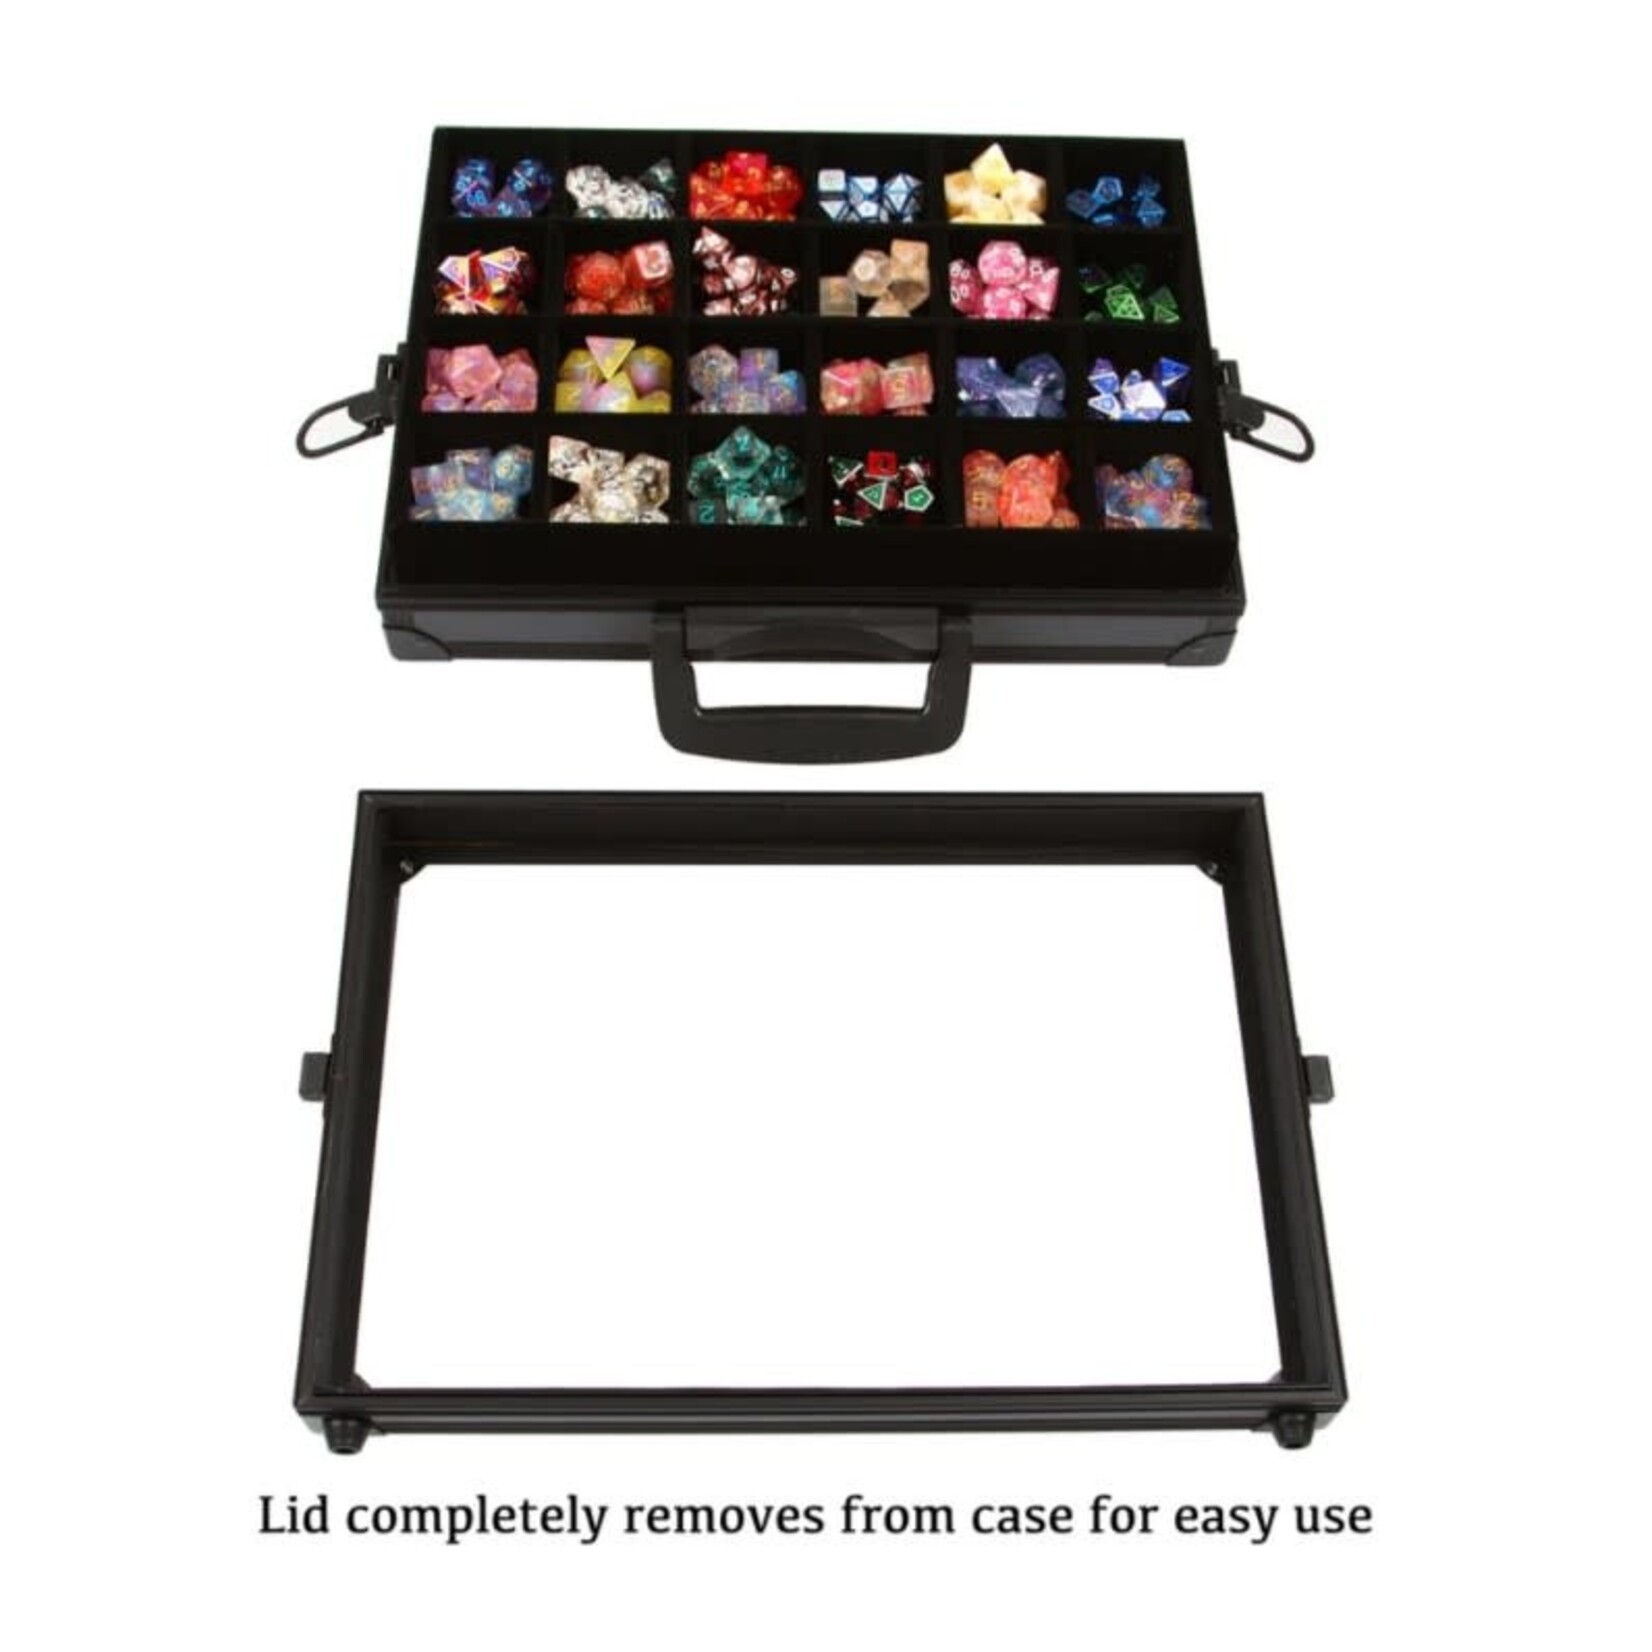 Forged Gaming Dice Display Case & Rolling Tray for up to 480 dice